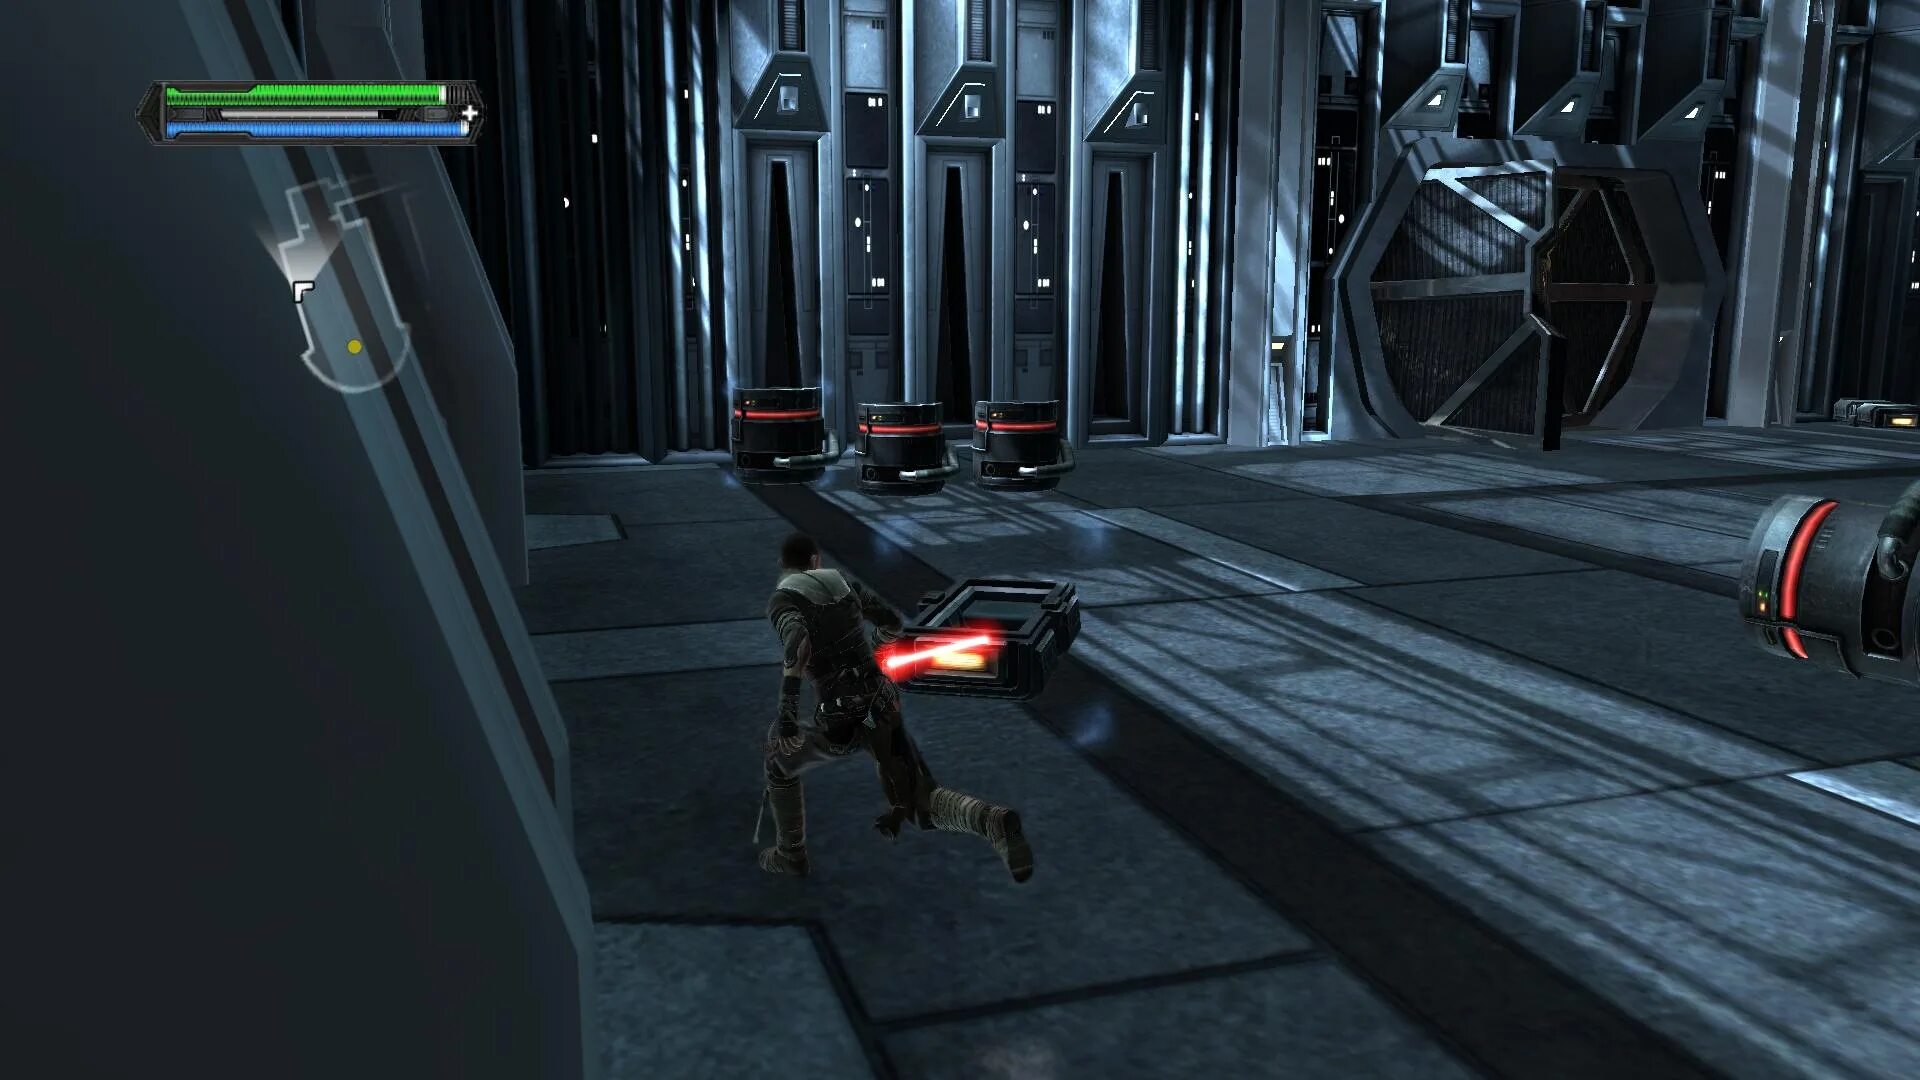 Star Wars: the Force unleashed - Ultimate Sith Edition. 10) Star Wars: the Force unleashed. Star Wars the Force unleashed Boss.